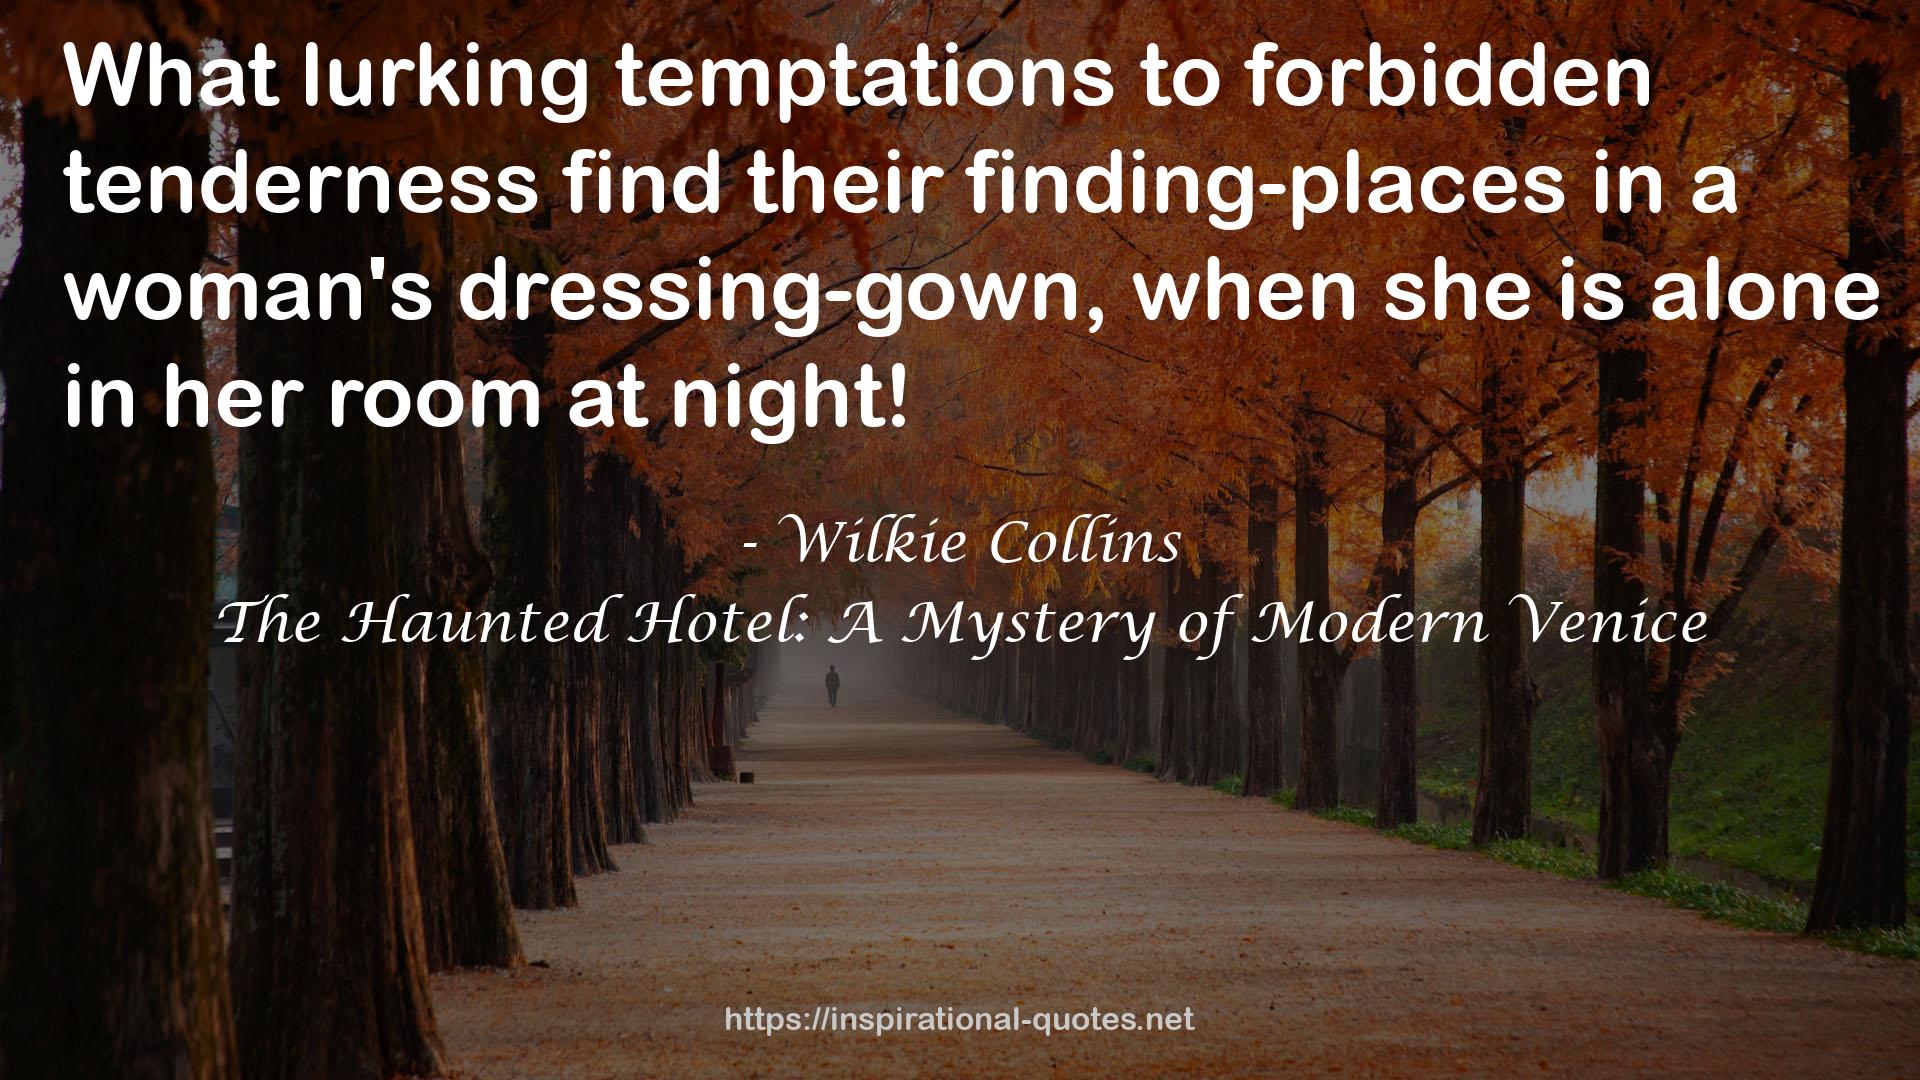 The Haunted Hotel: A Mystery of Modern Venice QUOTES